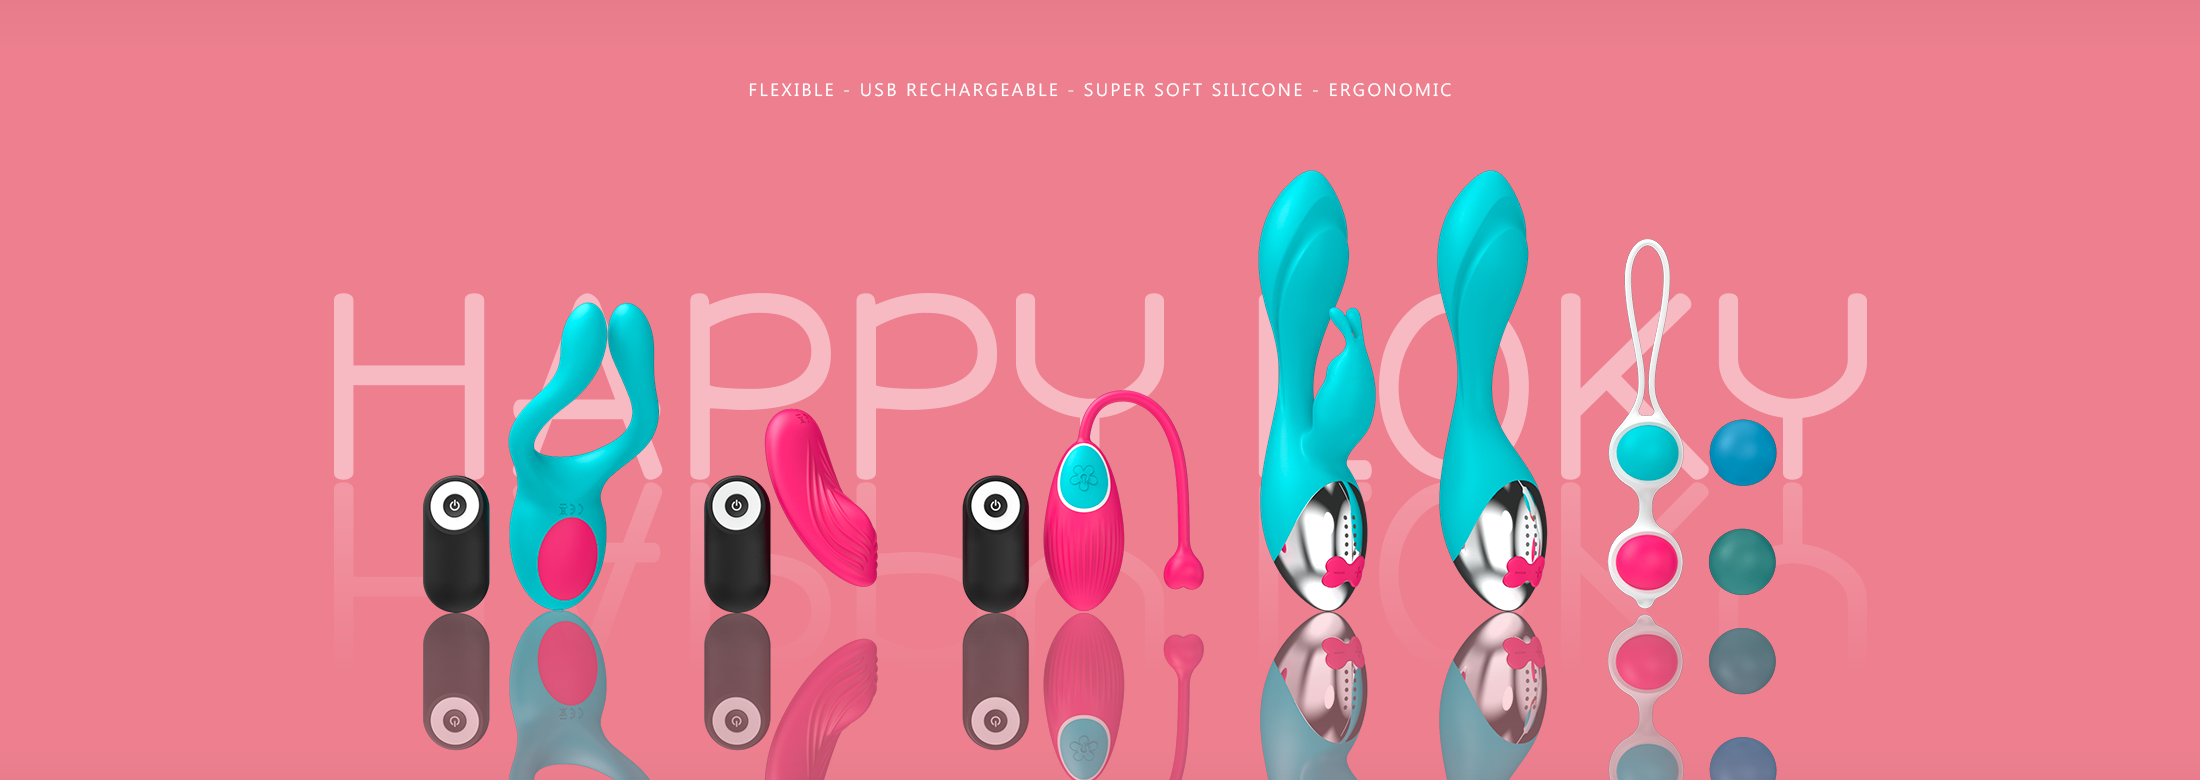 HAPPY LOKY | LUXURY SEX TOYS FOR WOMAN